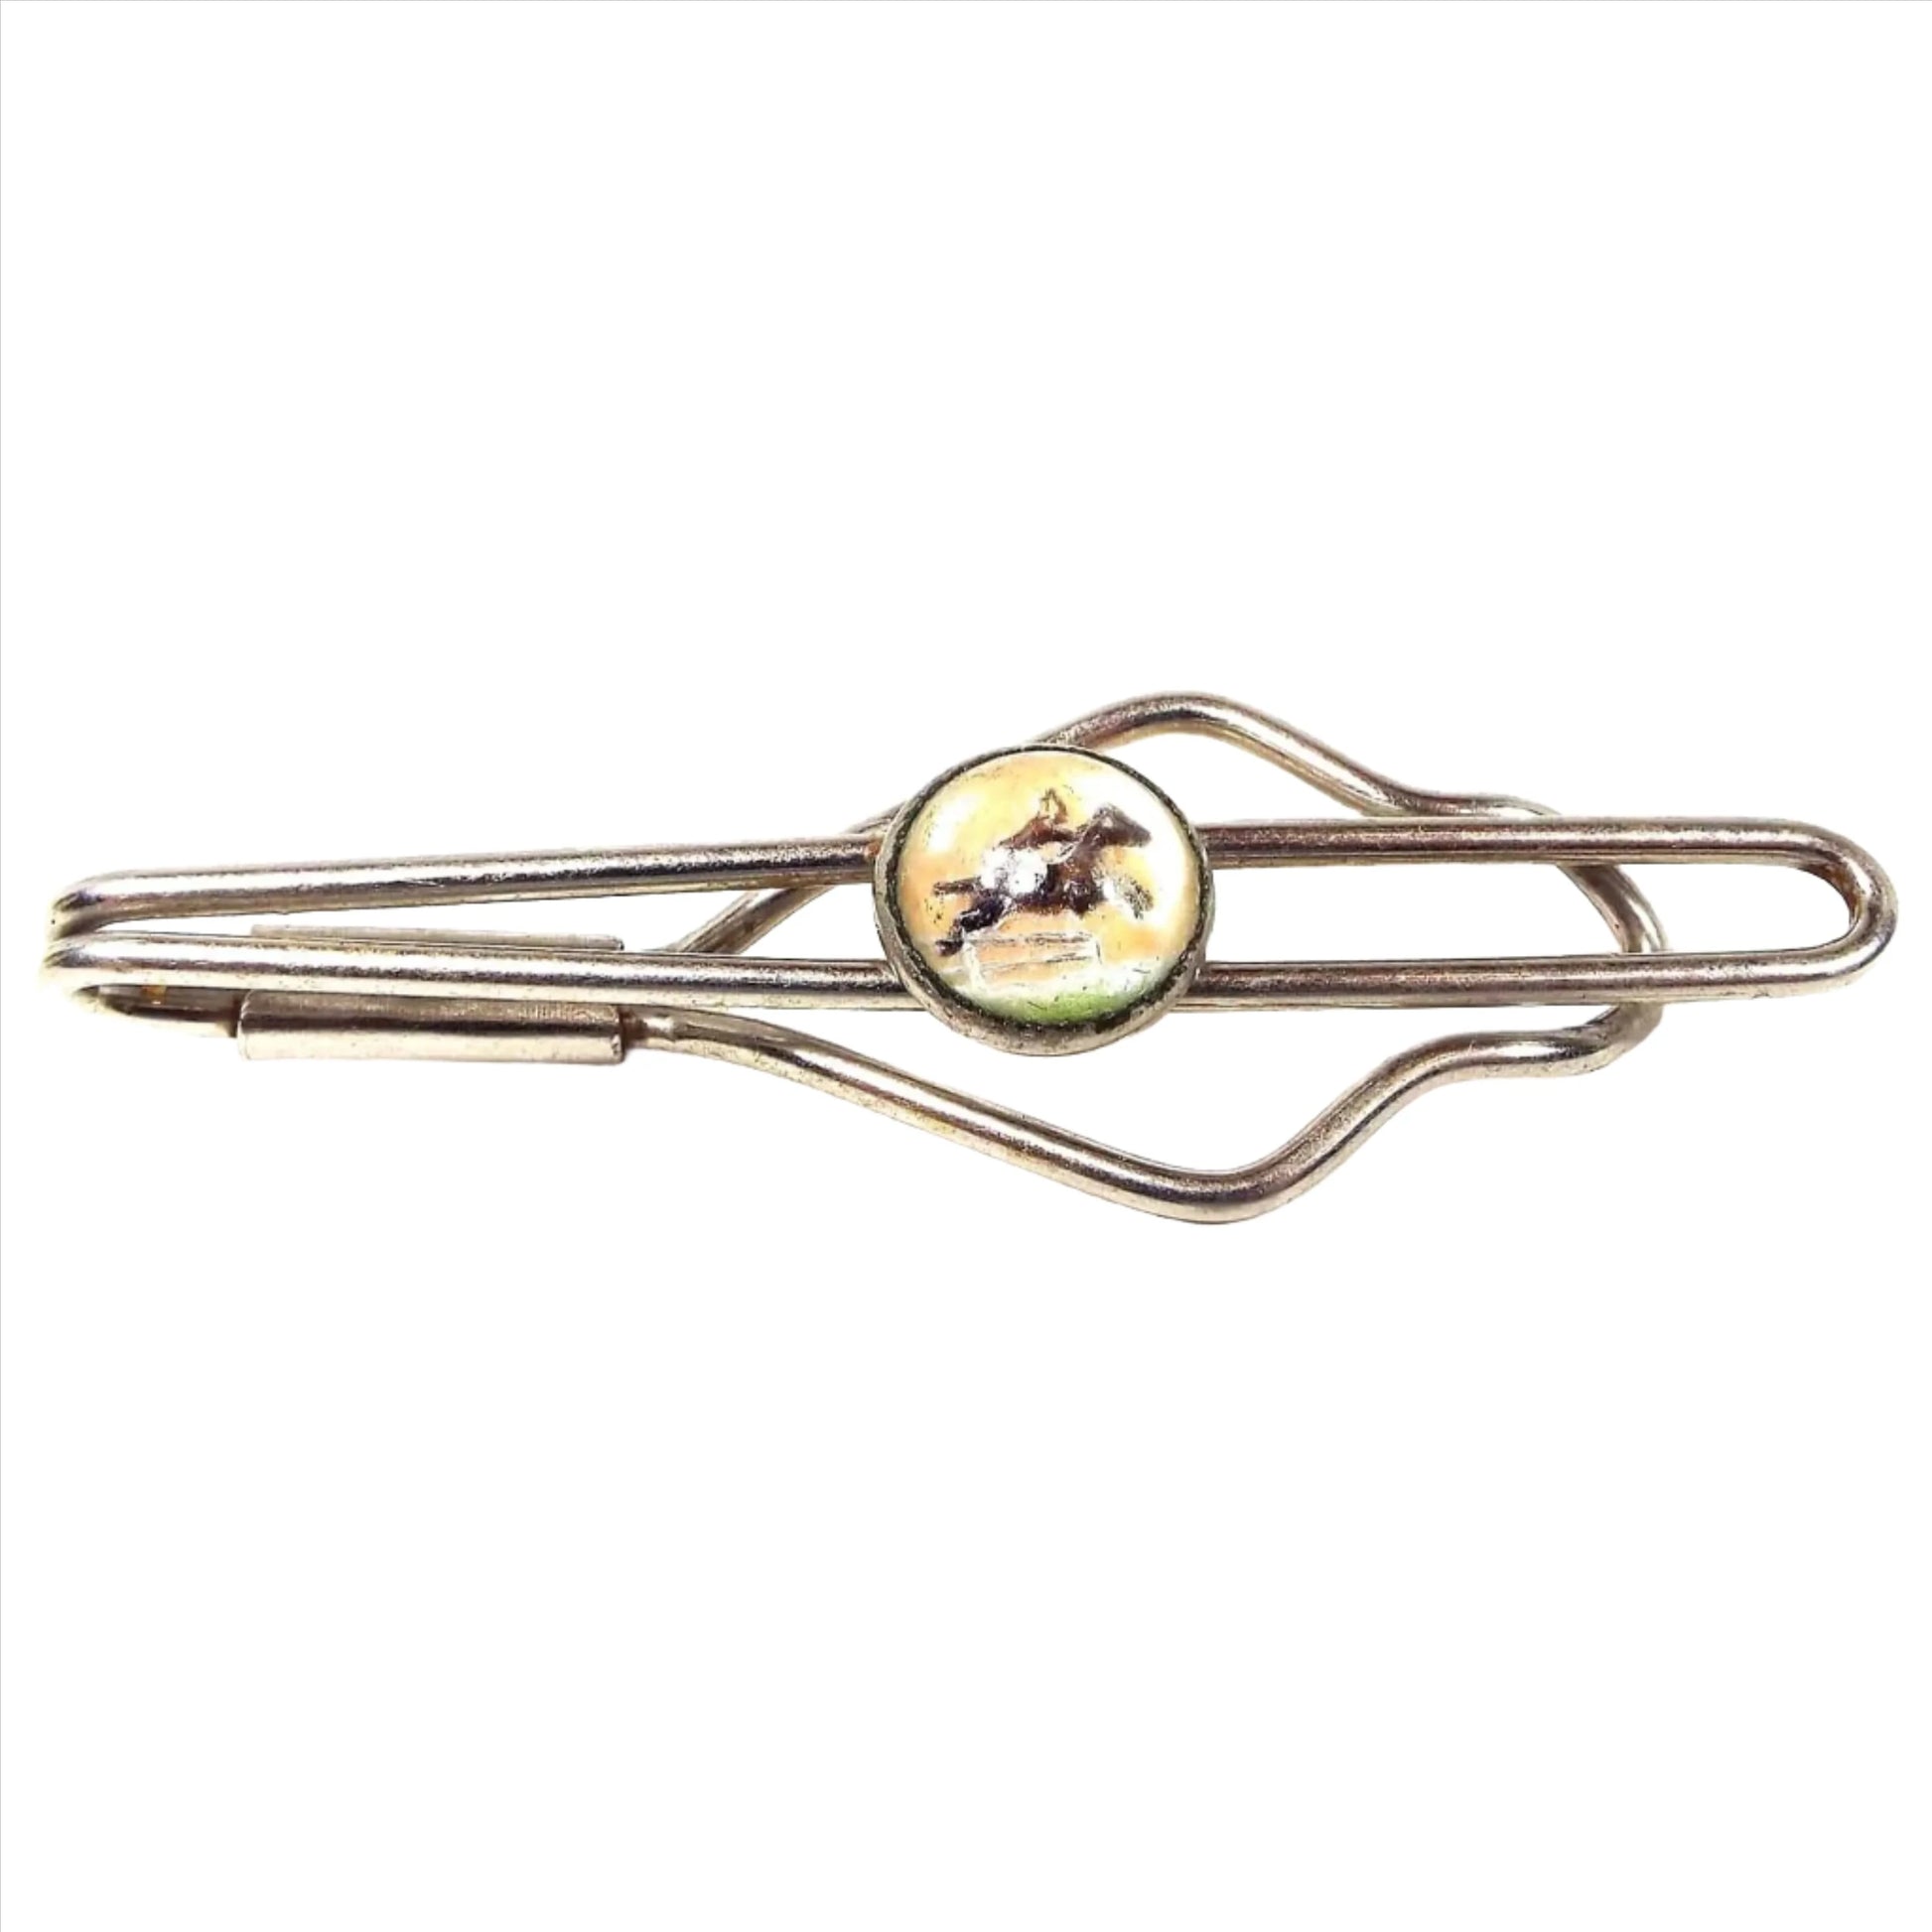 Front view of the Mid Century vintage slide on tie bar with intaglio cab. The metal is silver tone in color and has an open wire style shape. In the middle is a domed round plastic intaglio cab with a horse and rider jumping on it.